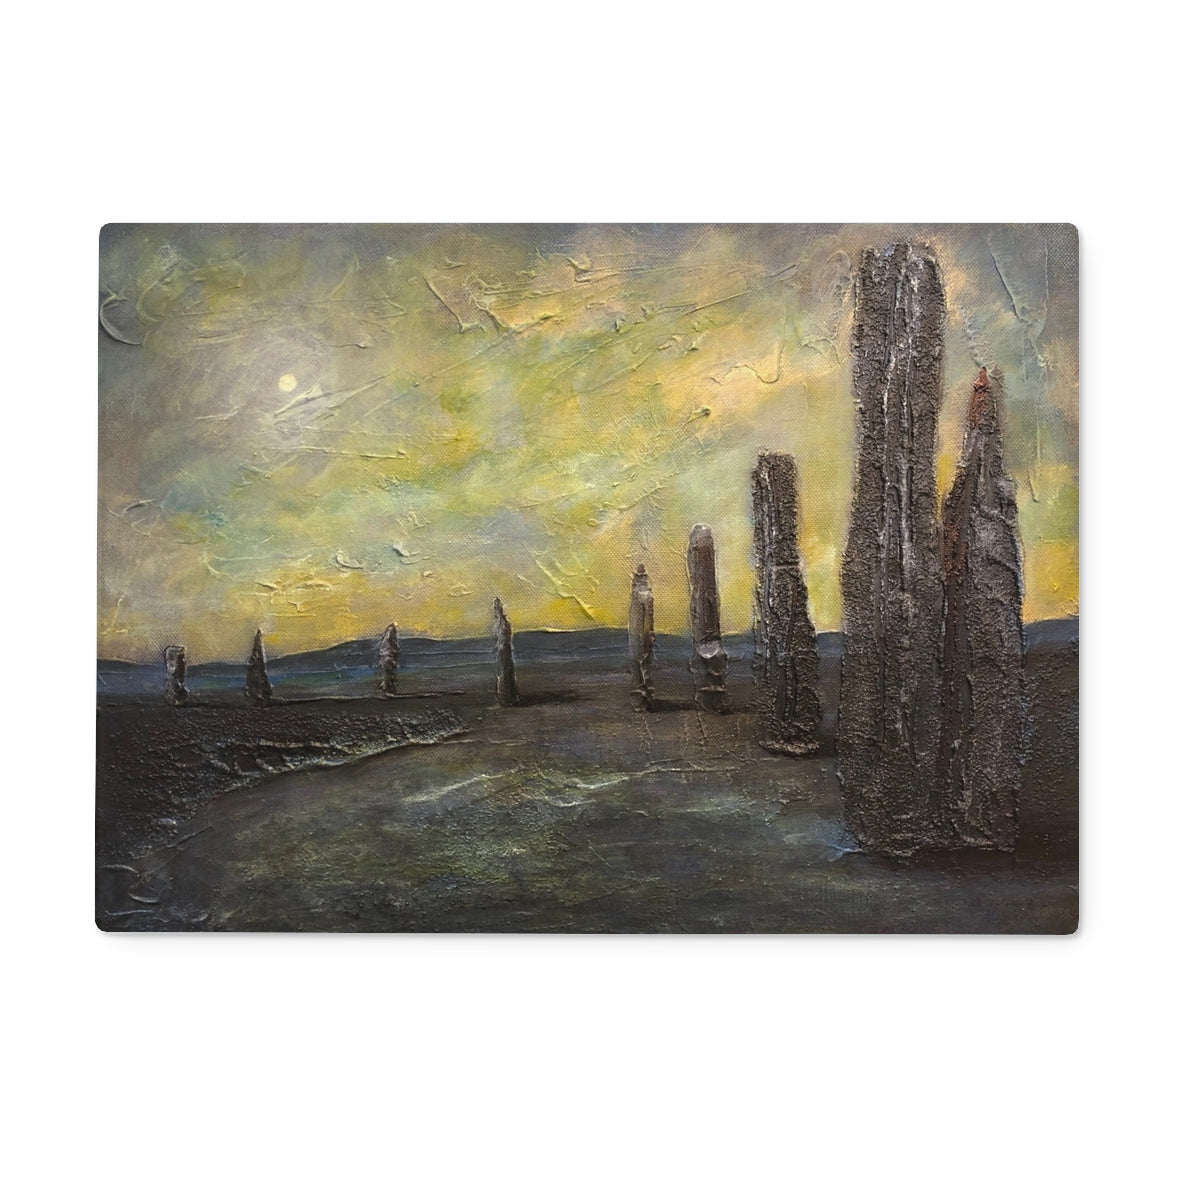 An Ethereal Ring Of Brodgar Art Gifts Glass Chopping Board-Glass Chopping Boards-Orkney Art Gallery-15"x11" Rectangular-Paintings, Prints, Homeware, Art Gifts From Scotland By Scottish Artist Kevin Hunter